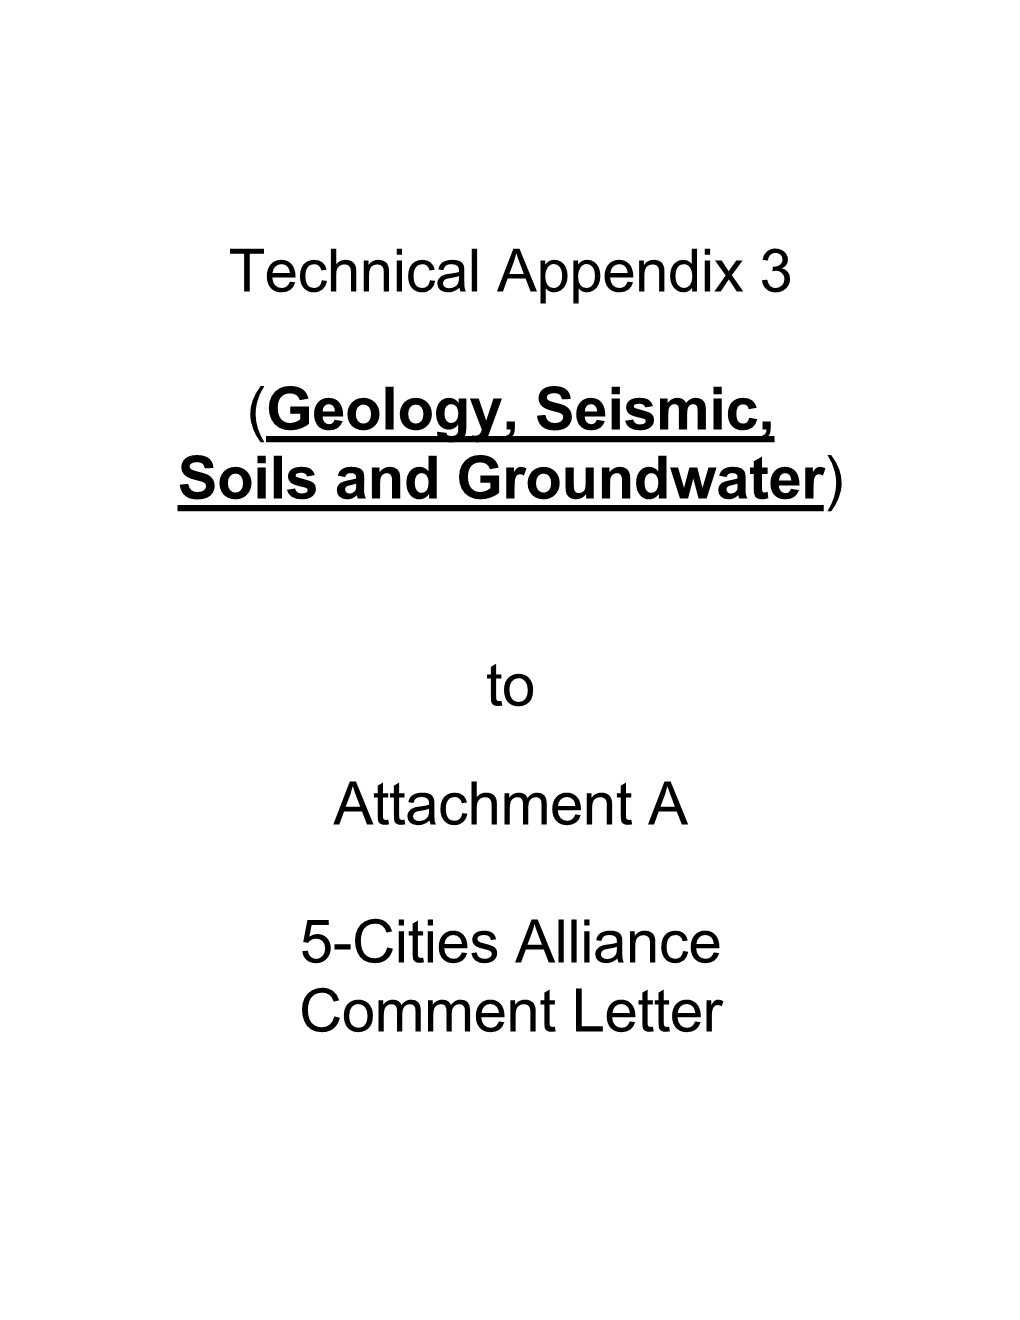 Geology, Seismic, Soils and Groundwater)